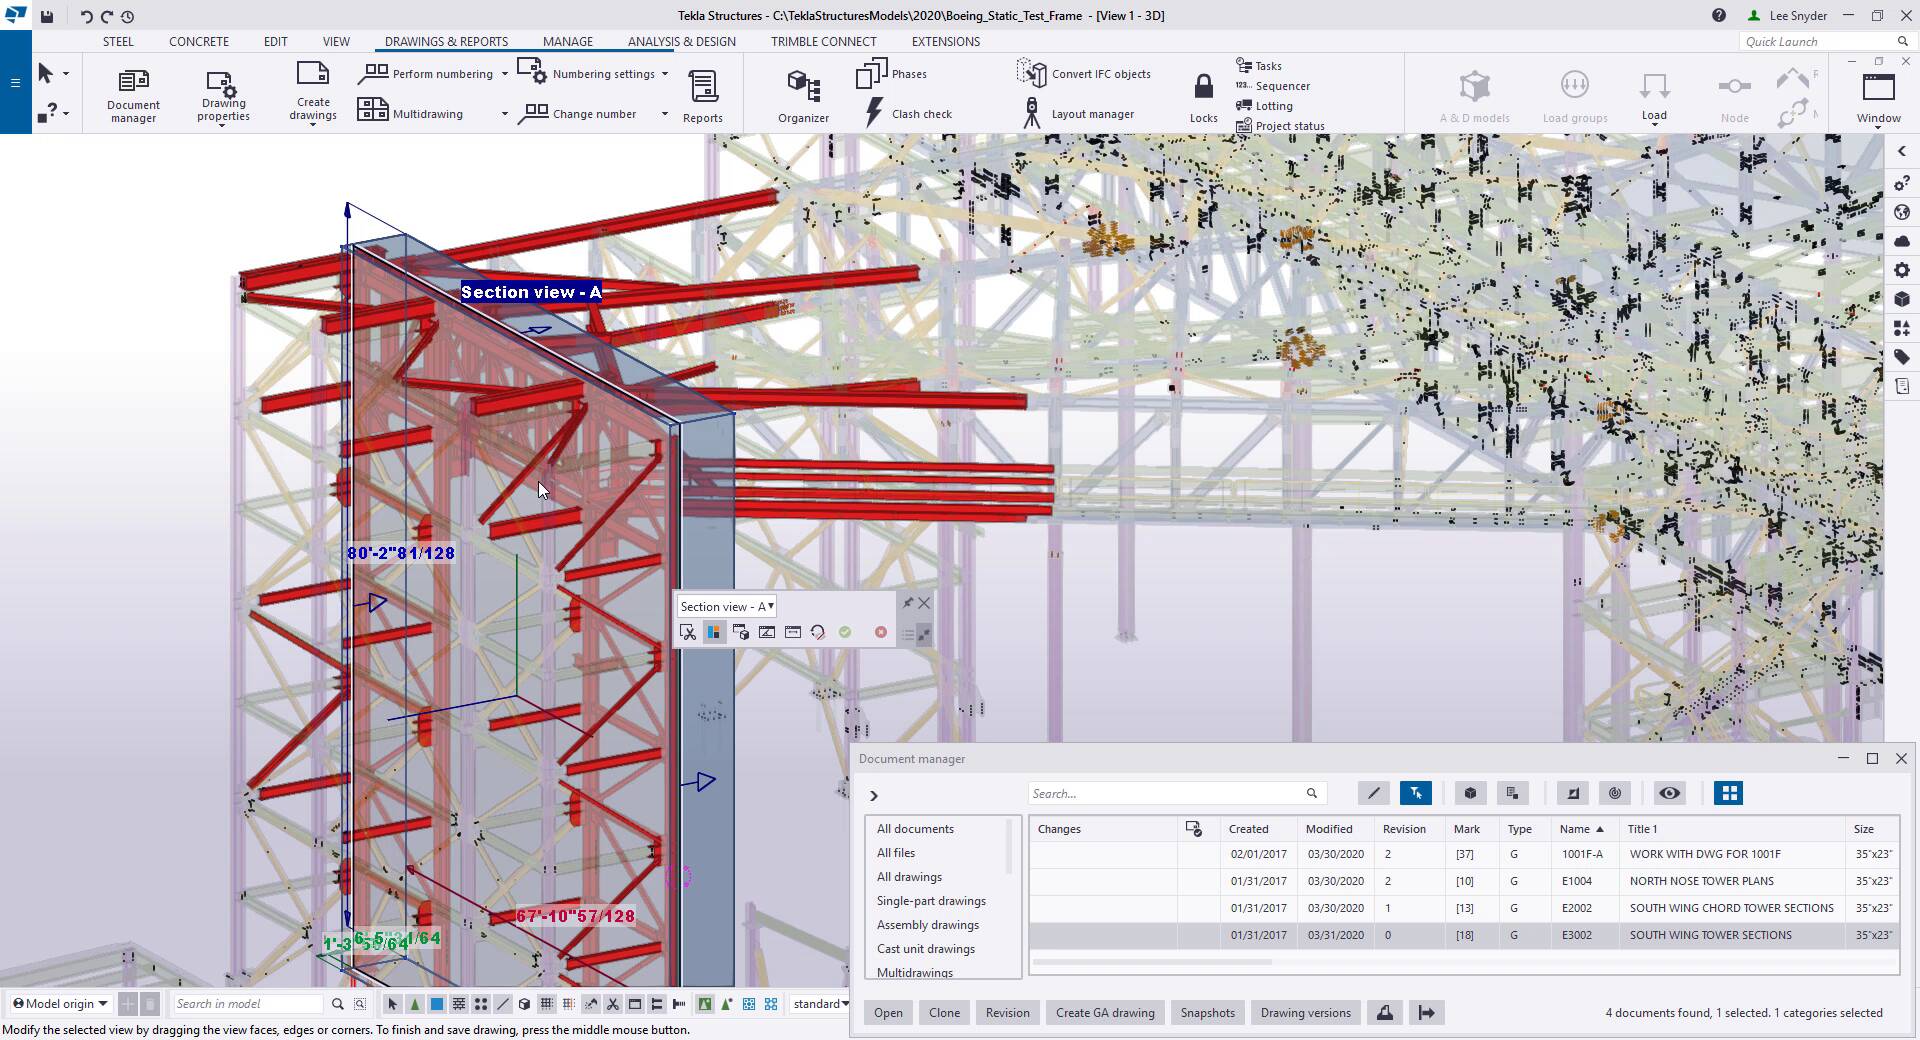 Boeing hangar proves sky is the limit for Tekla